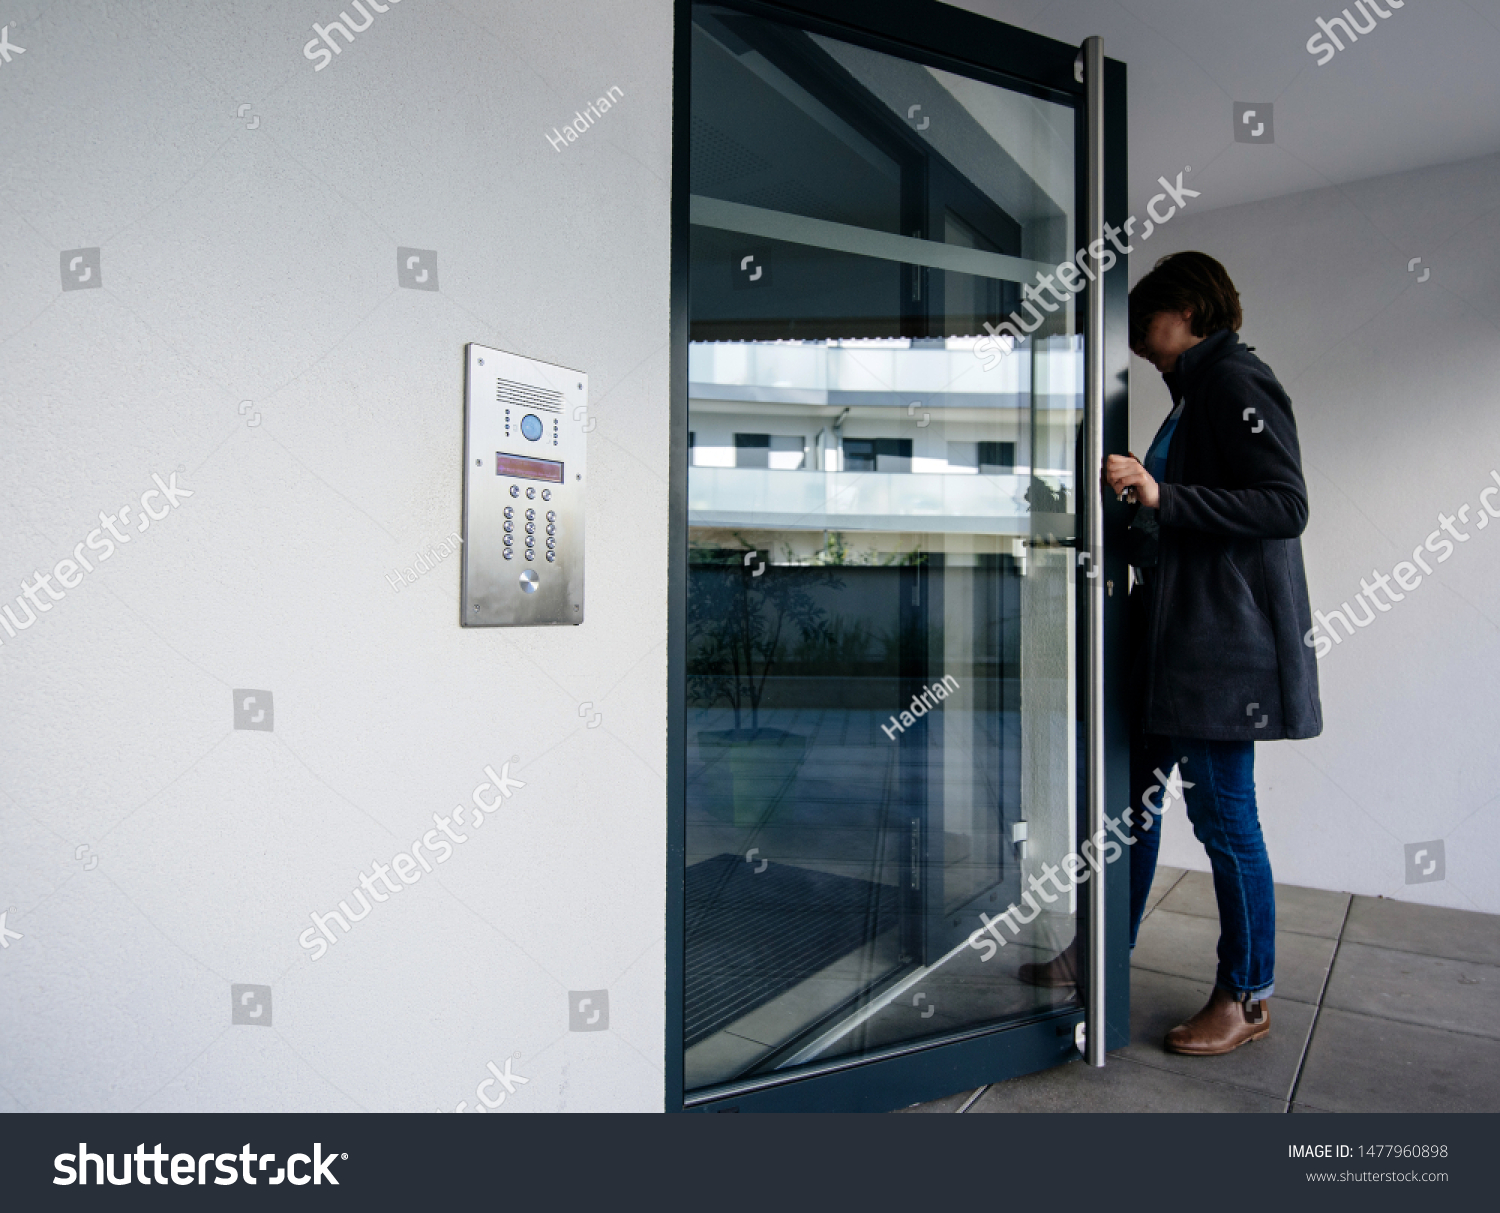 Side view of woman entering modern apartment building with glass door and modern intercom system #1477960898